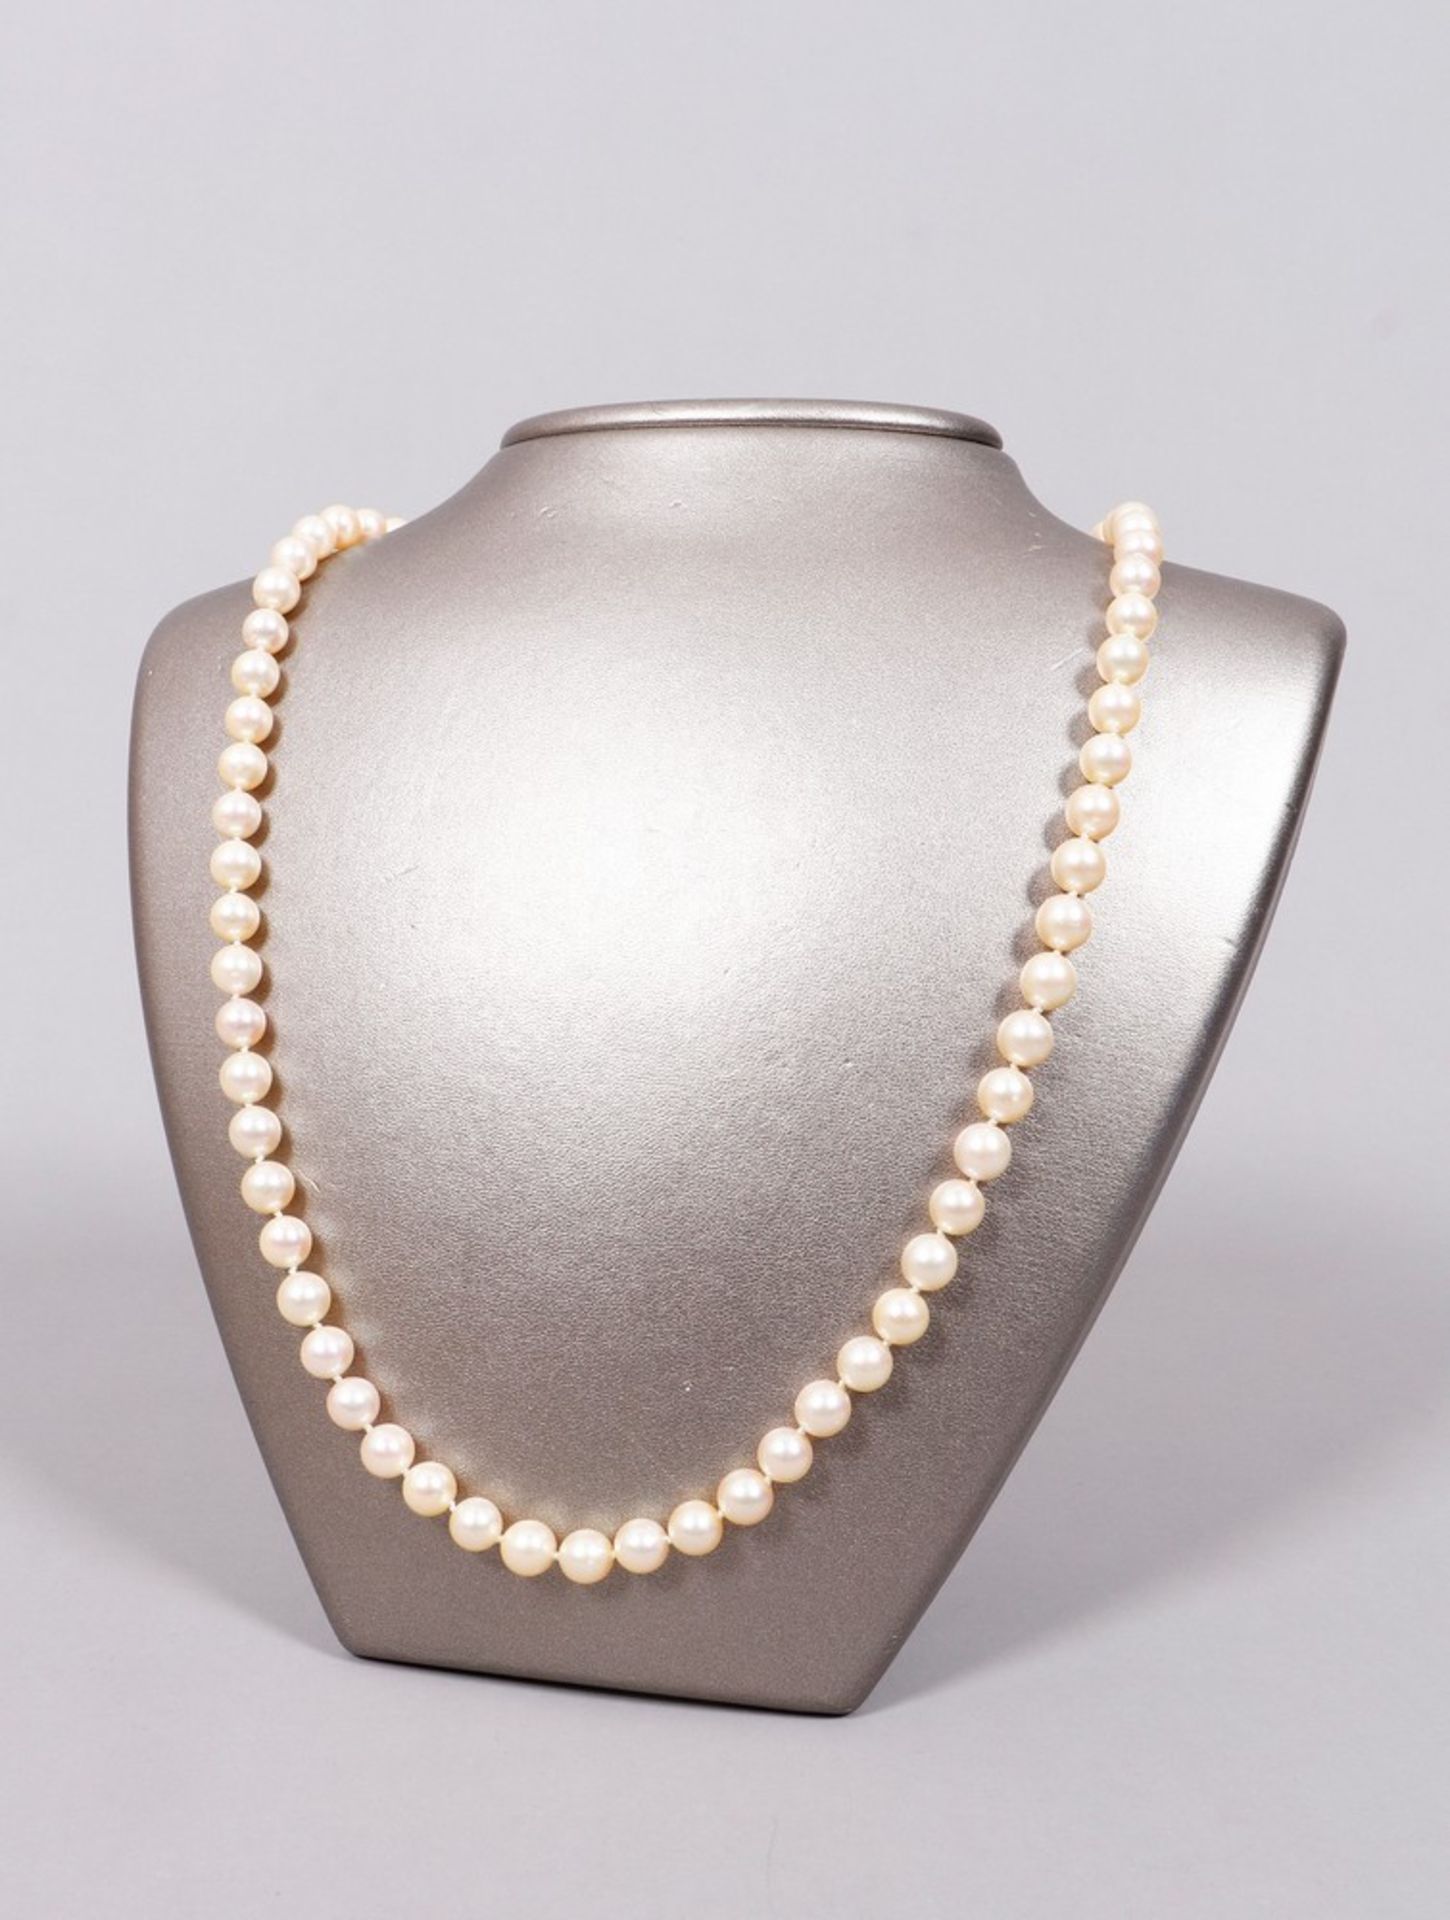 Pearl necklace, 750 white gold clasp, Italy, mid 20th C.